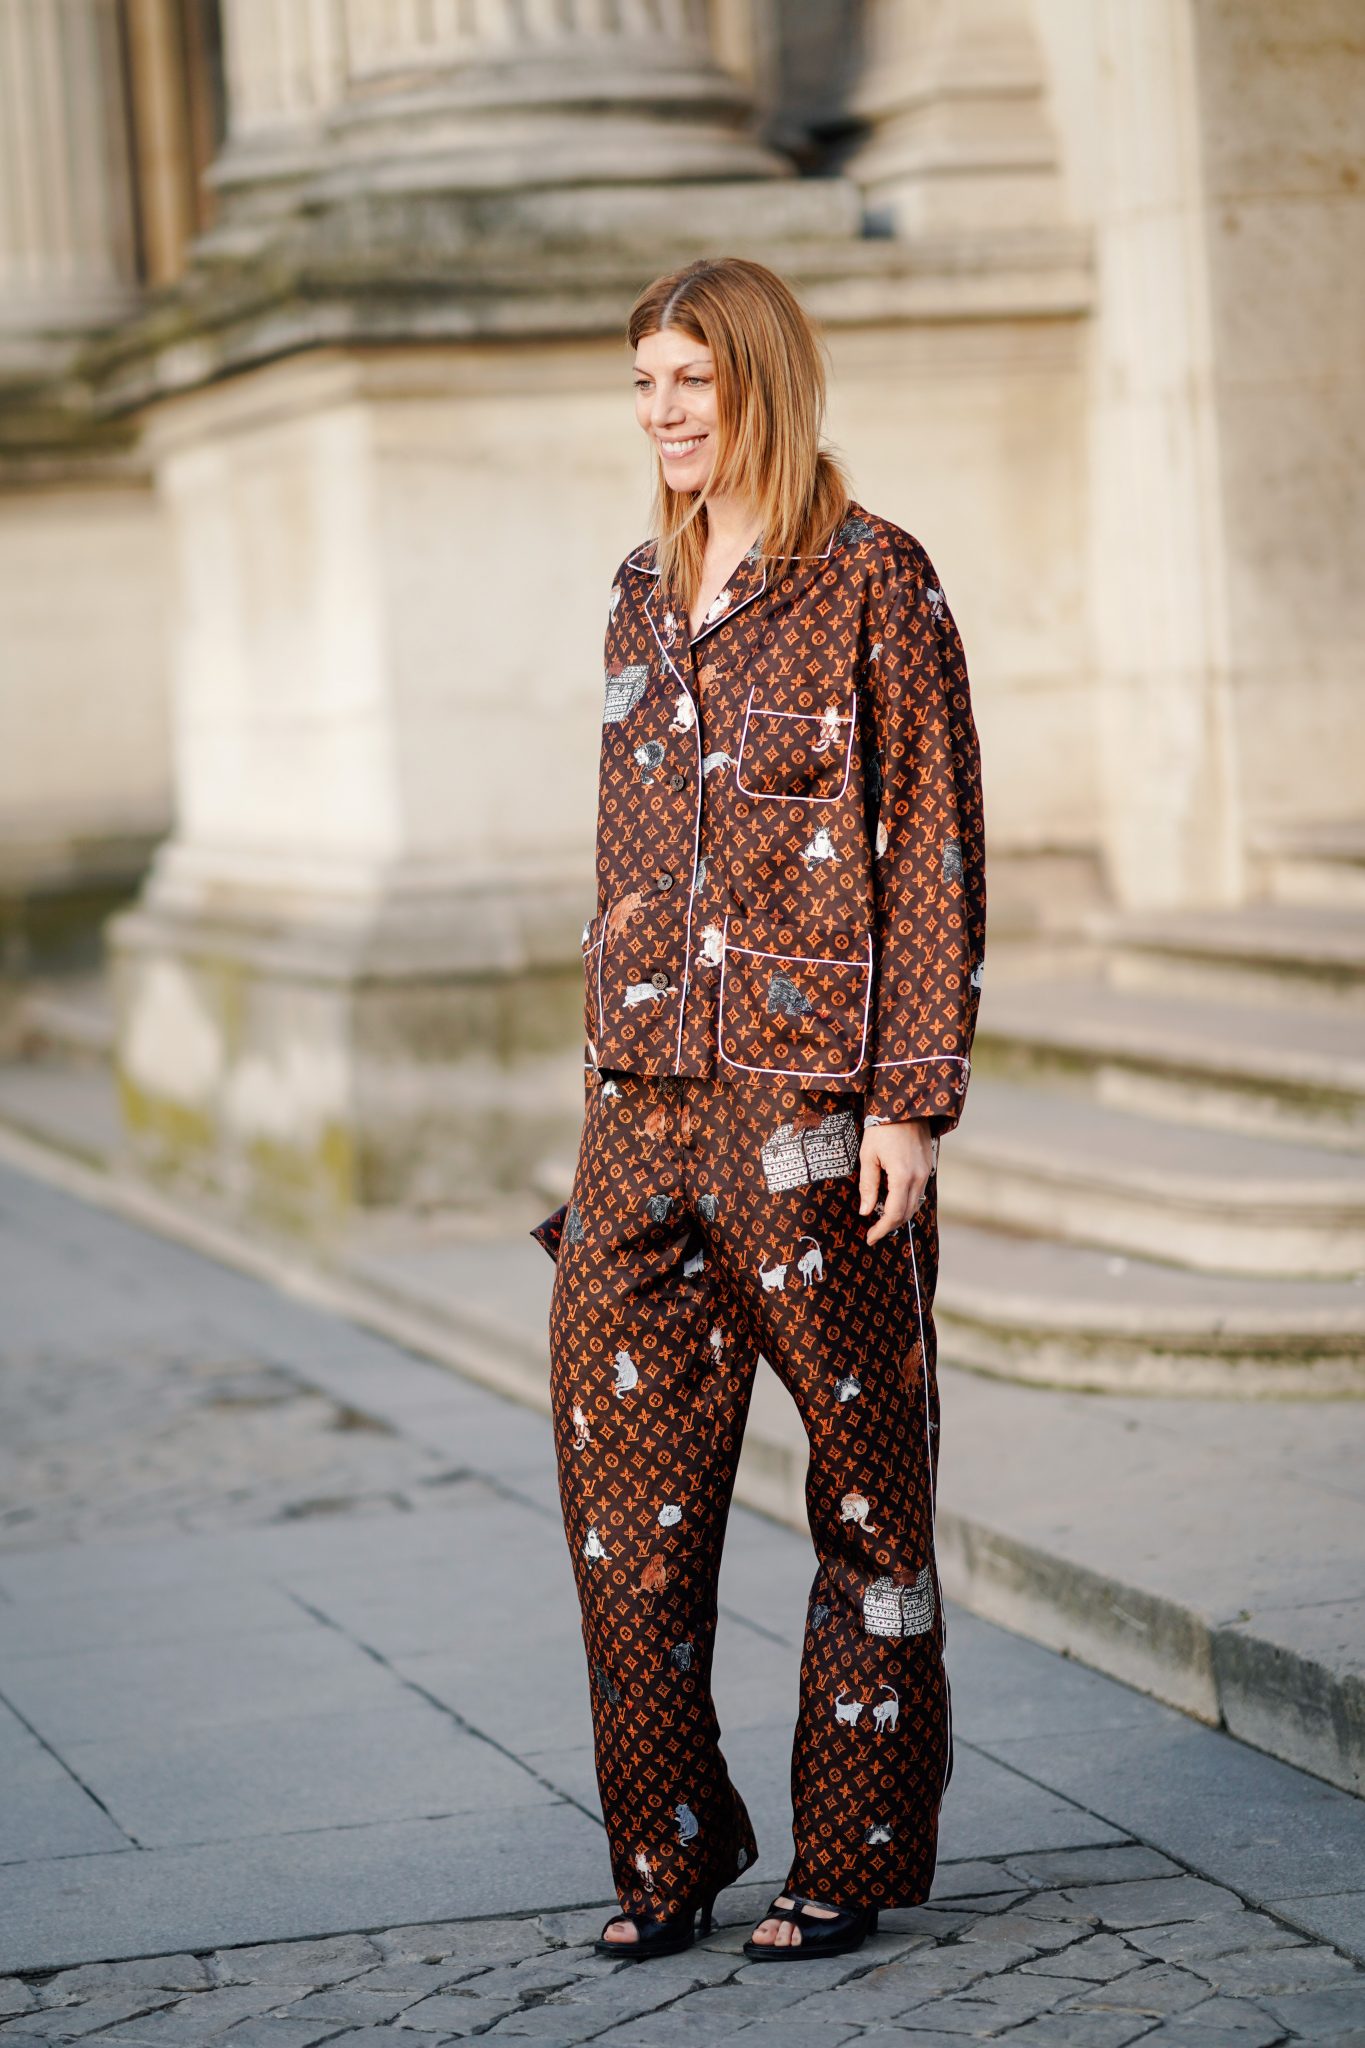 How to wear your pyjamas outdoors and get away with it